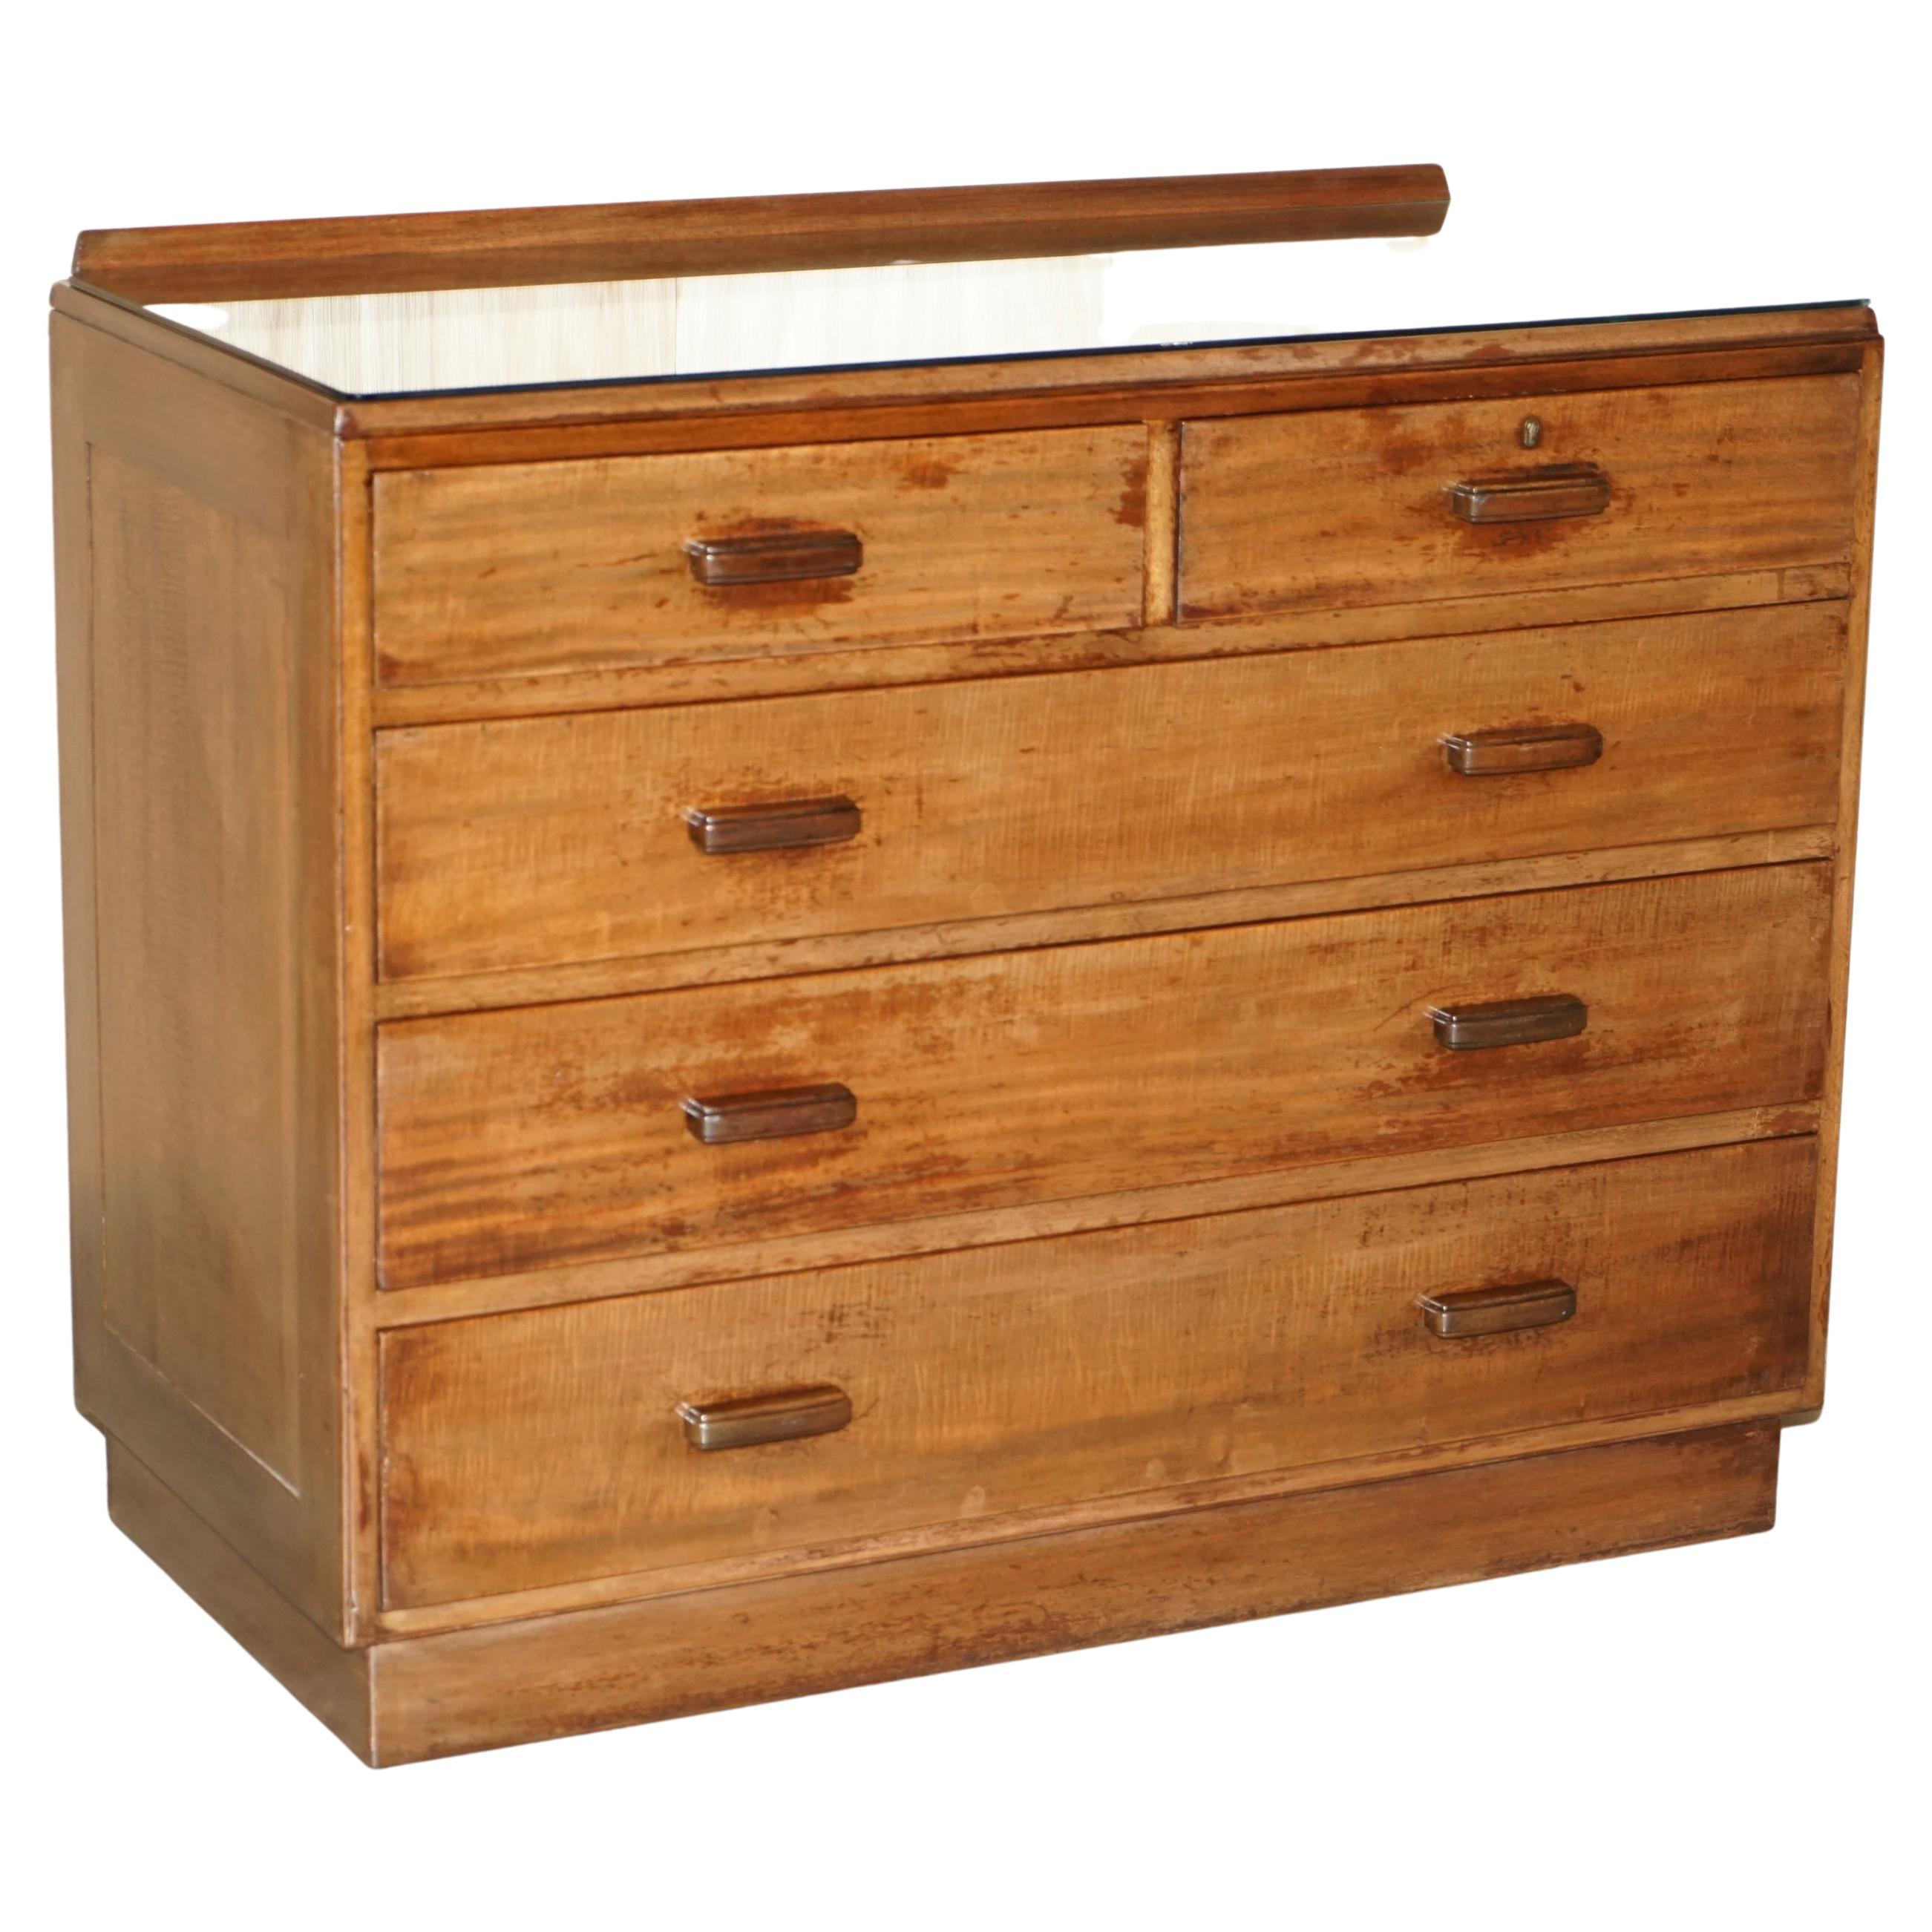 Alfred COX Mid-Century Modern Chests of Drawers Circa 1952 English Oak For Sale